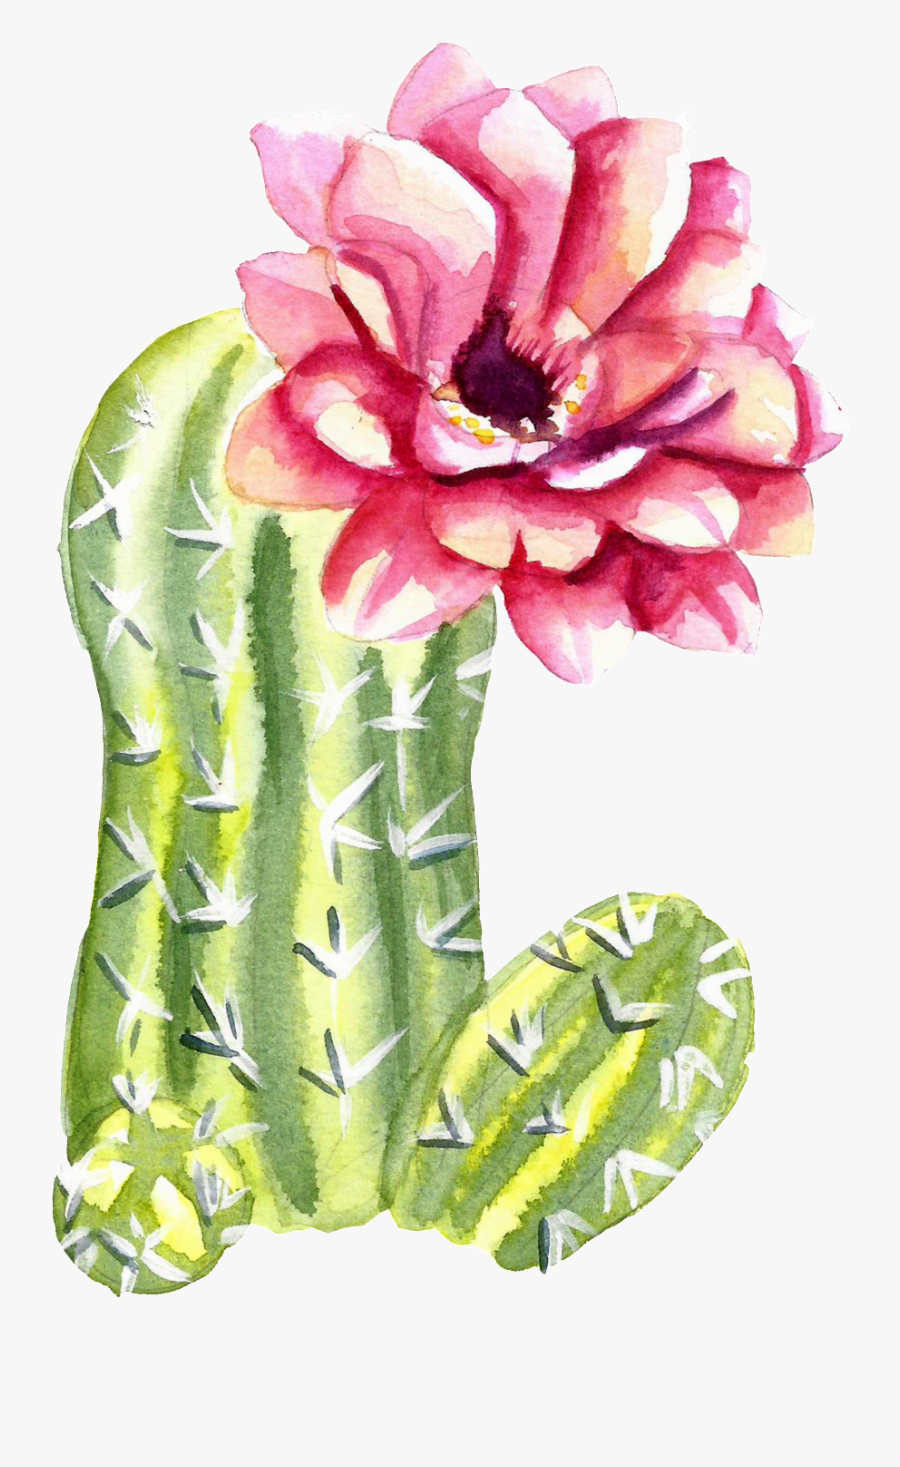 Green Watercolor Hand Painted Cactus Flower Transparent - Flower Cactus Watercolor Png, Transparent Clipart